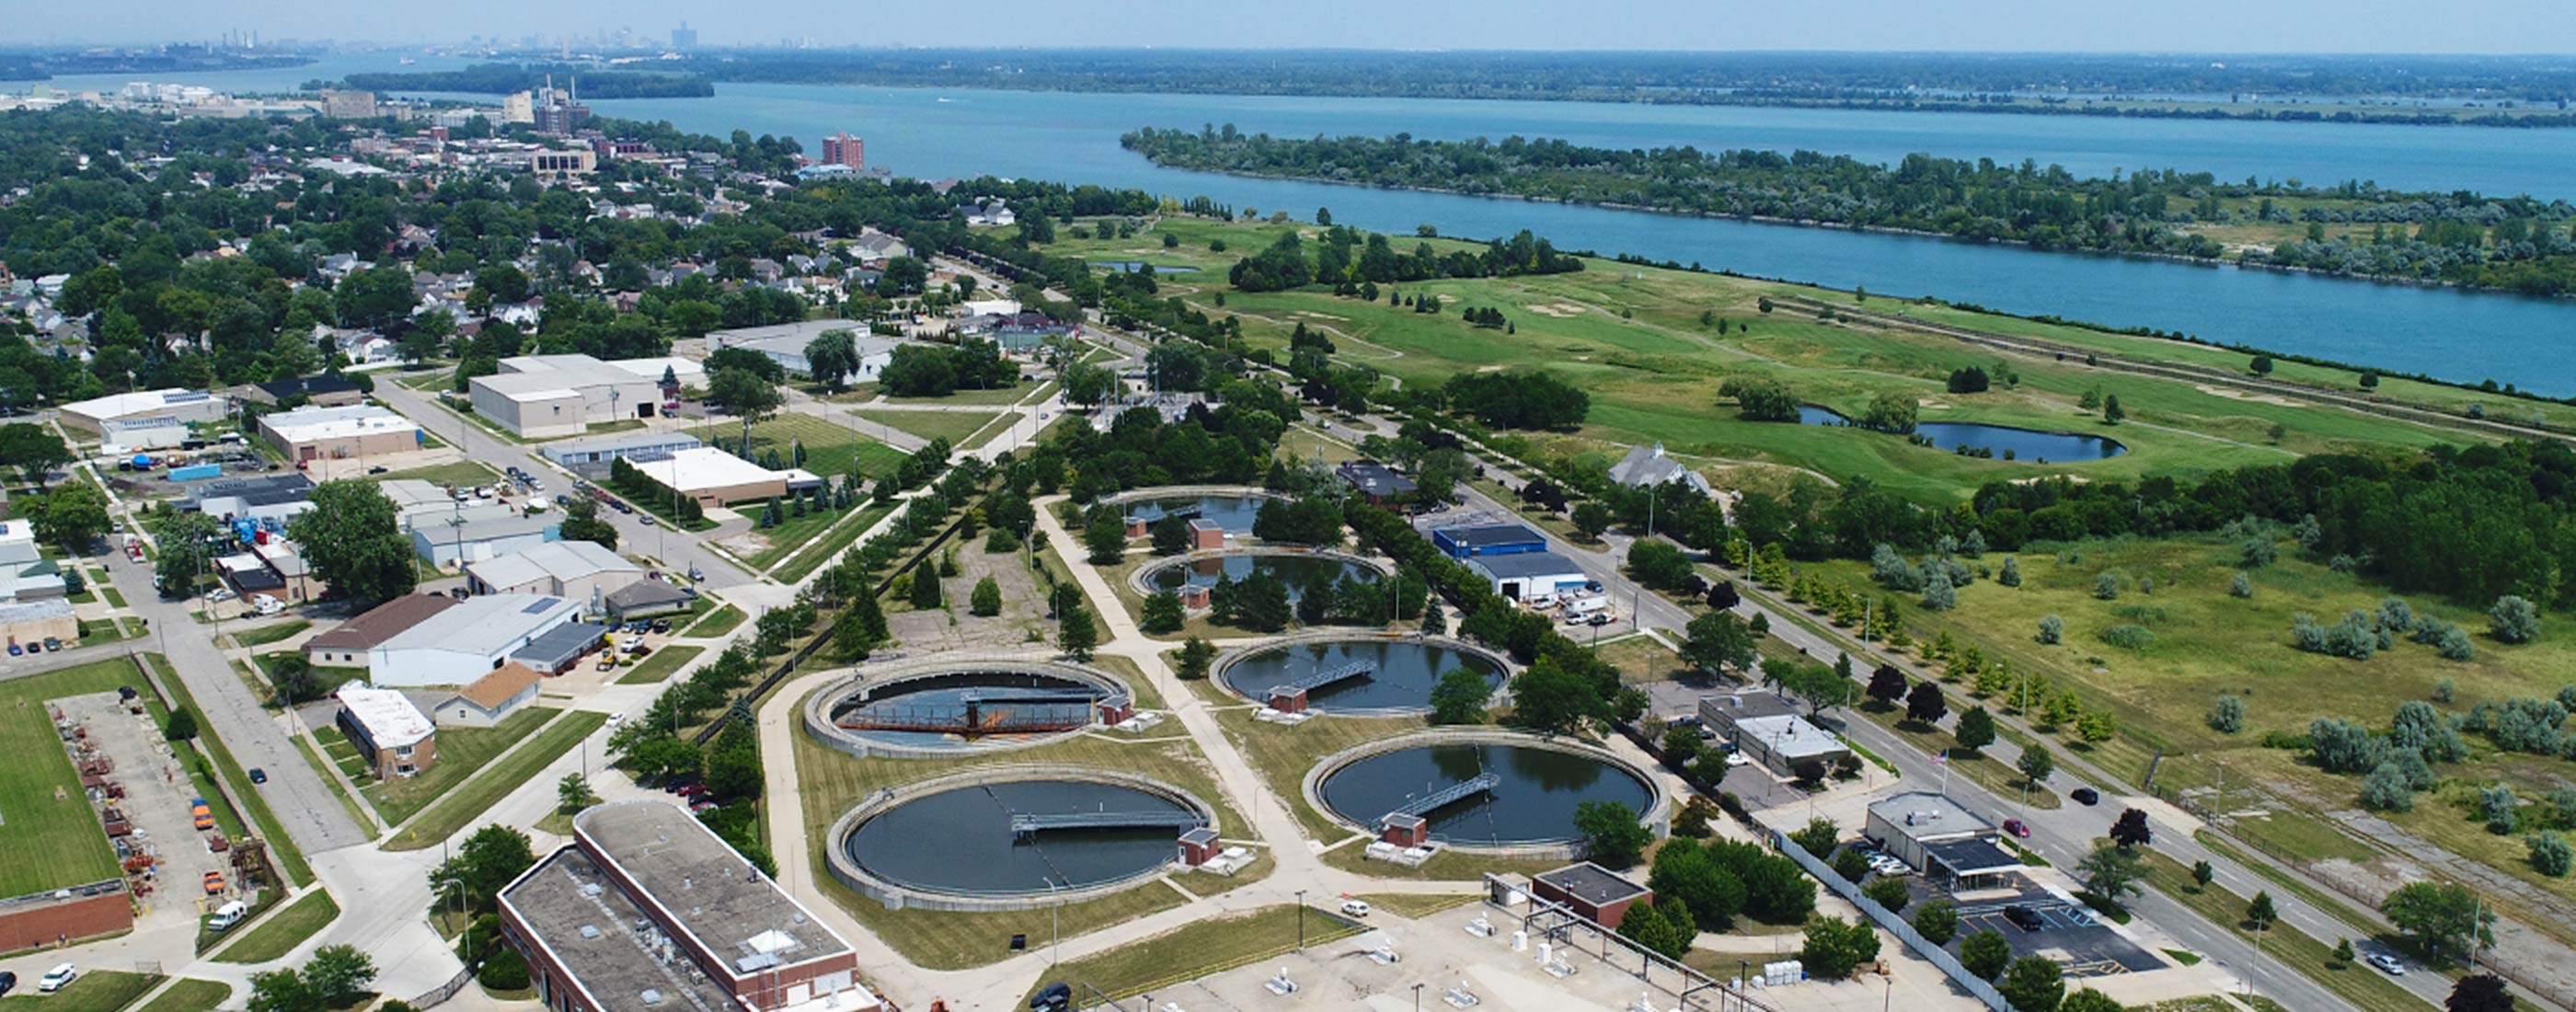 An aerial view of the Downriver System, the second largest wastewater system in Michigan.